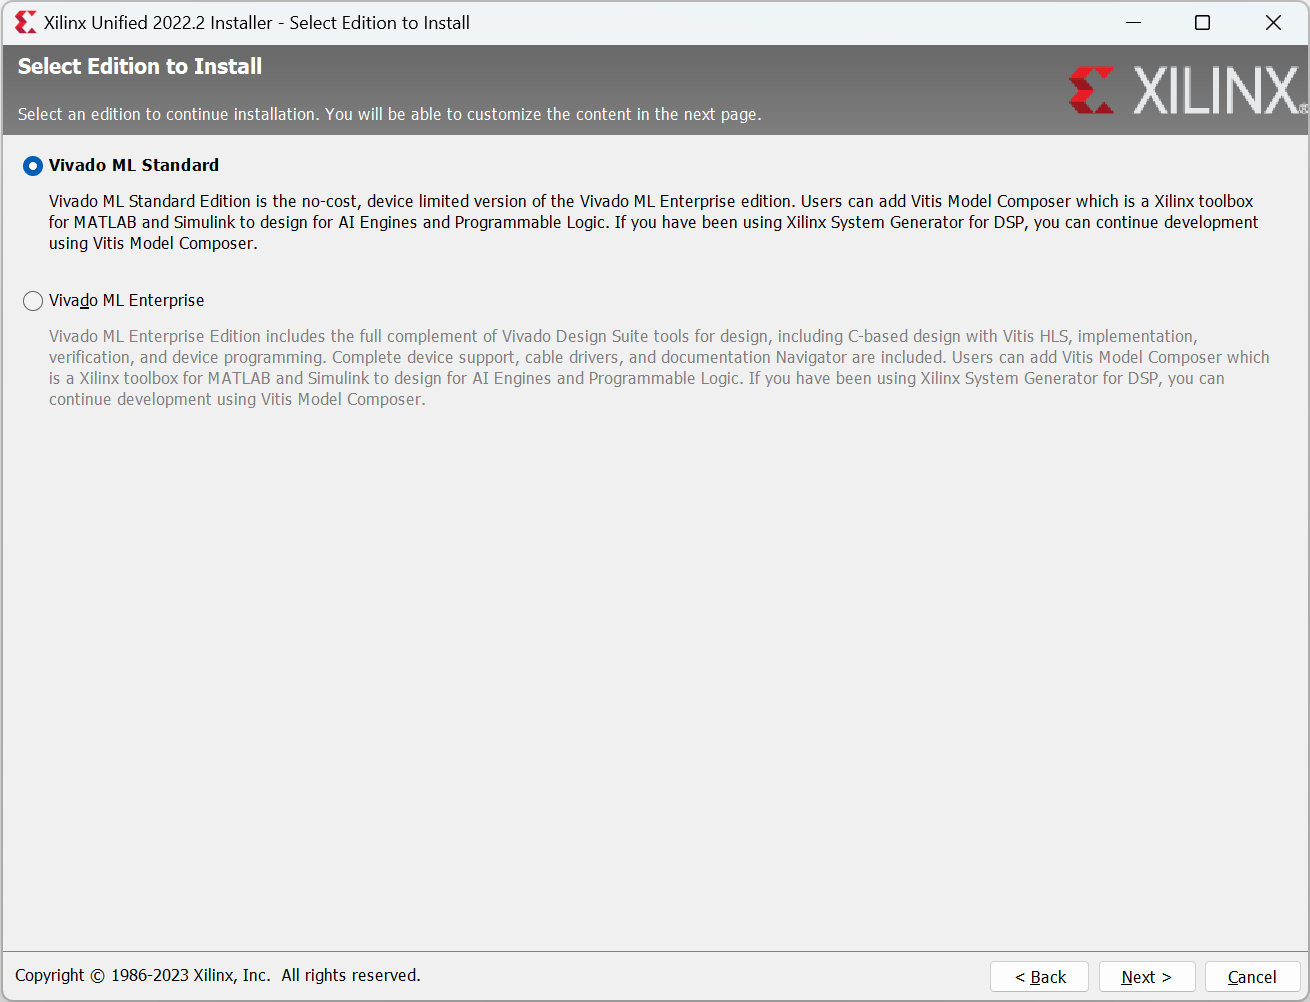 Xilinx Unified Installer "Select Edition to Install" Page Screenshot